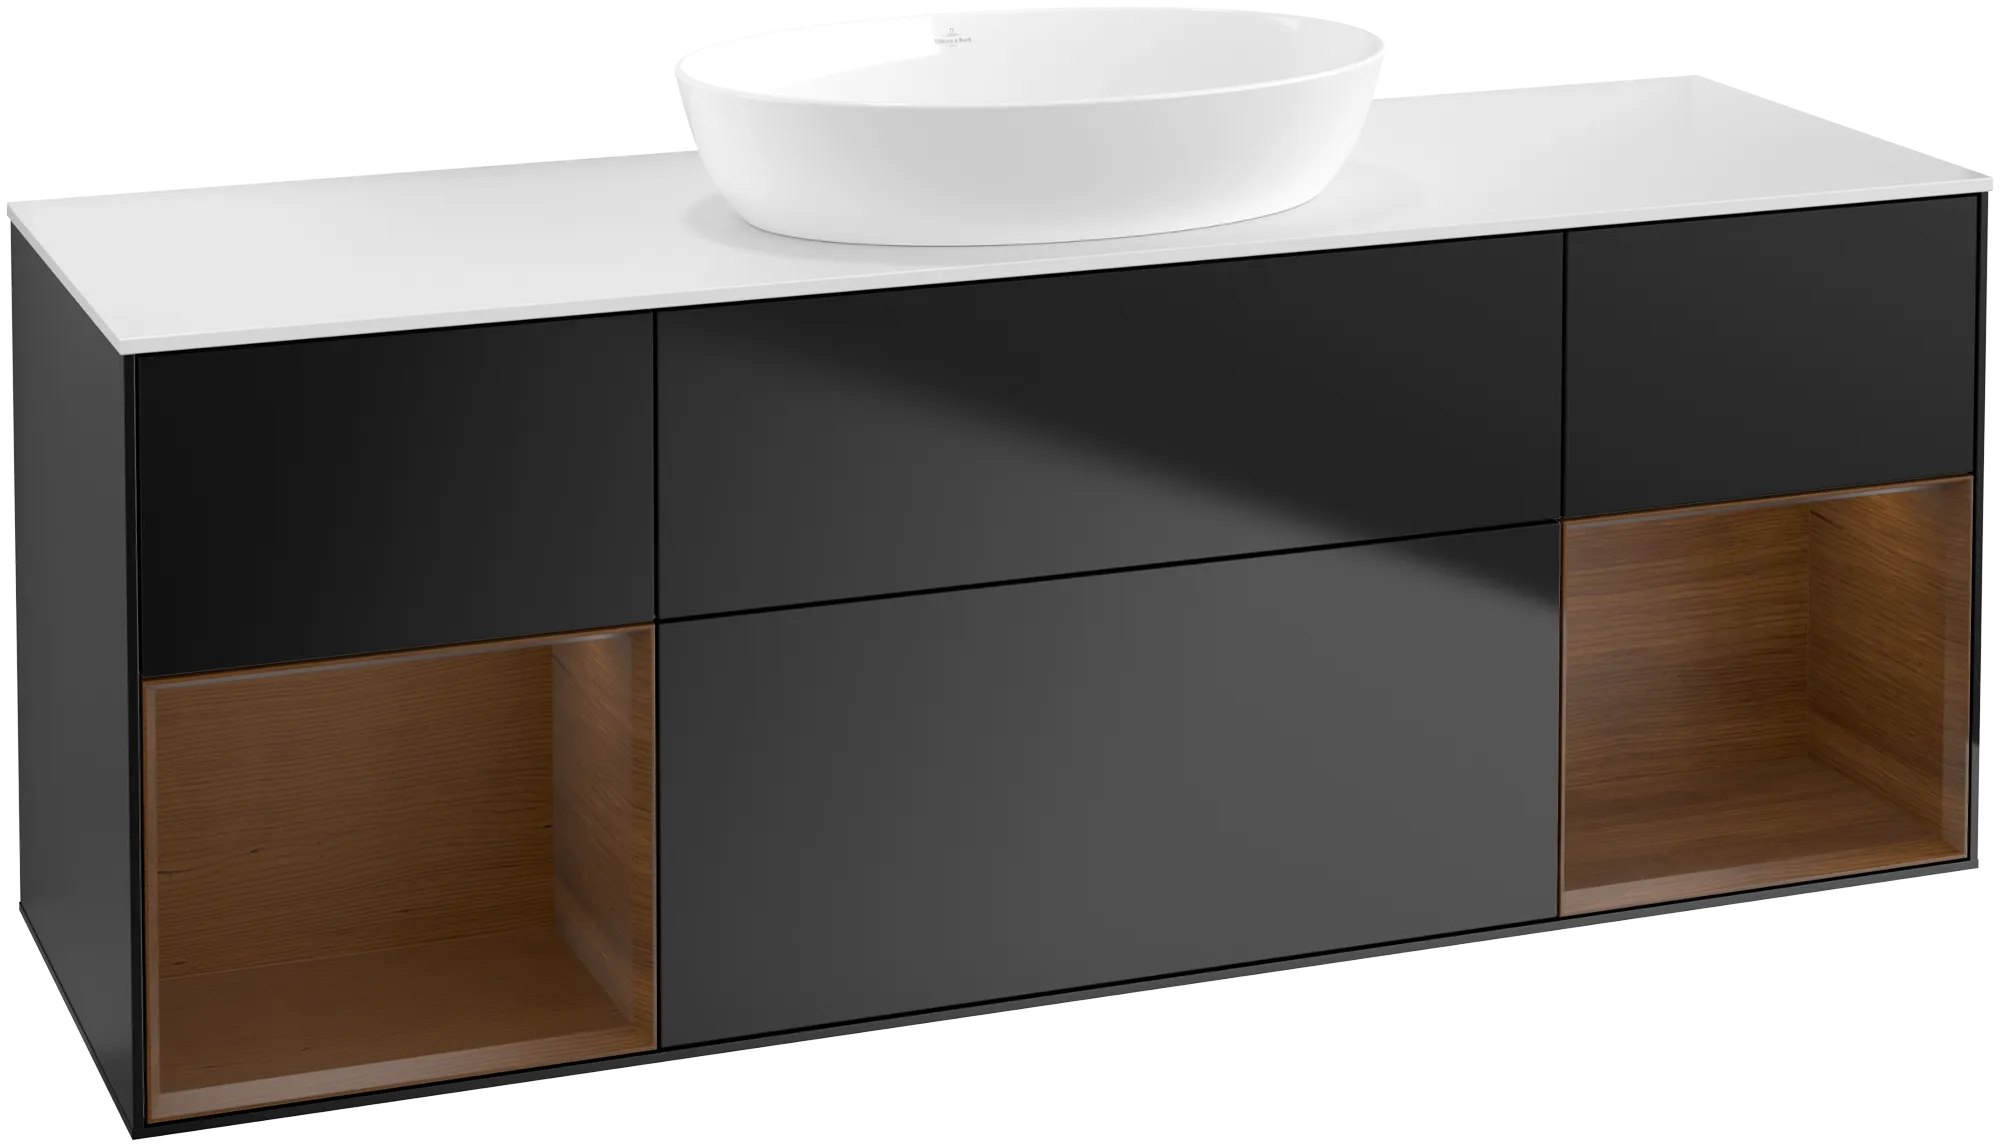 Picture of VILLEROY BOCH Finion Vanity unit, with lighting, 4 pull-out compartments, 1600 x 603 x 501 mm, Black Matt Lacquer / Walnut Veneer / Glass White Matt #FD01GNPD